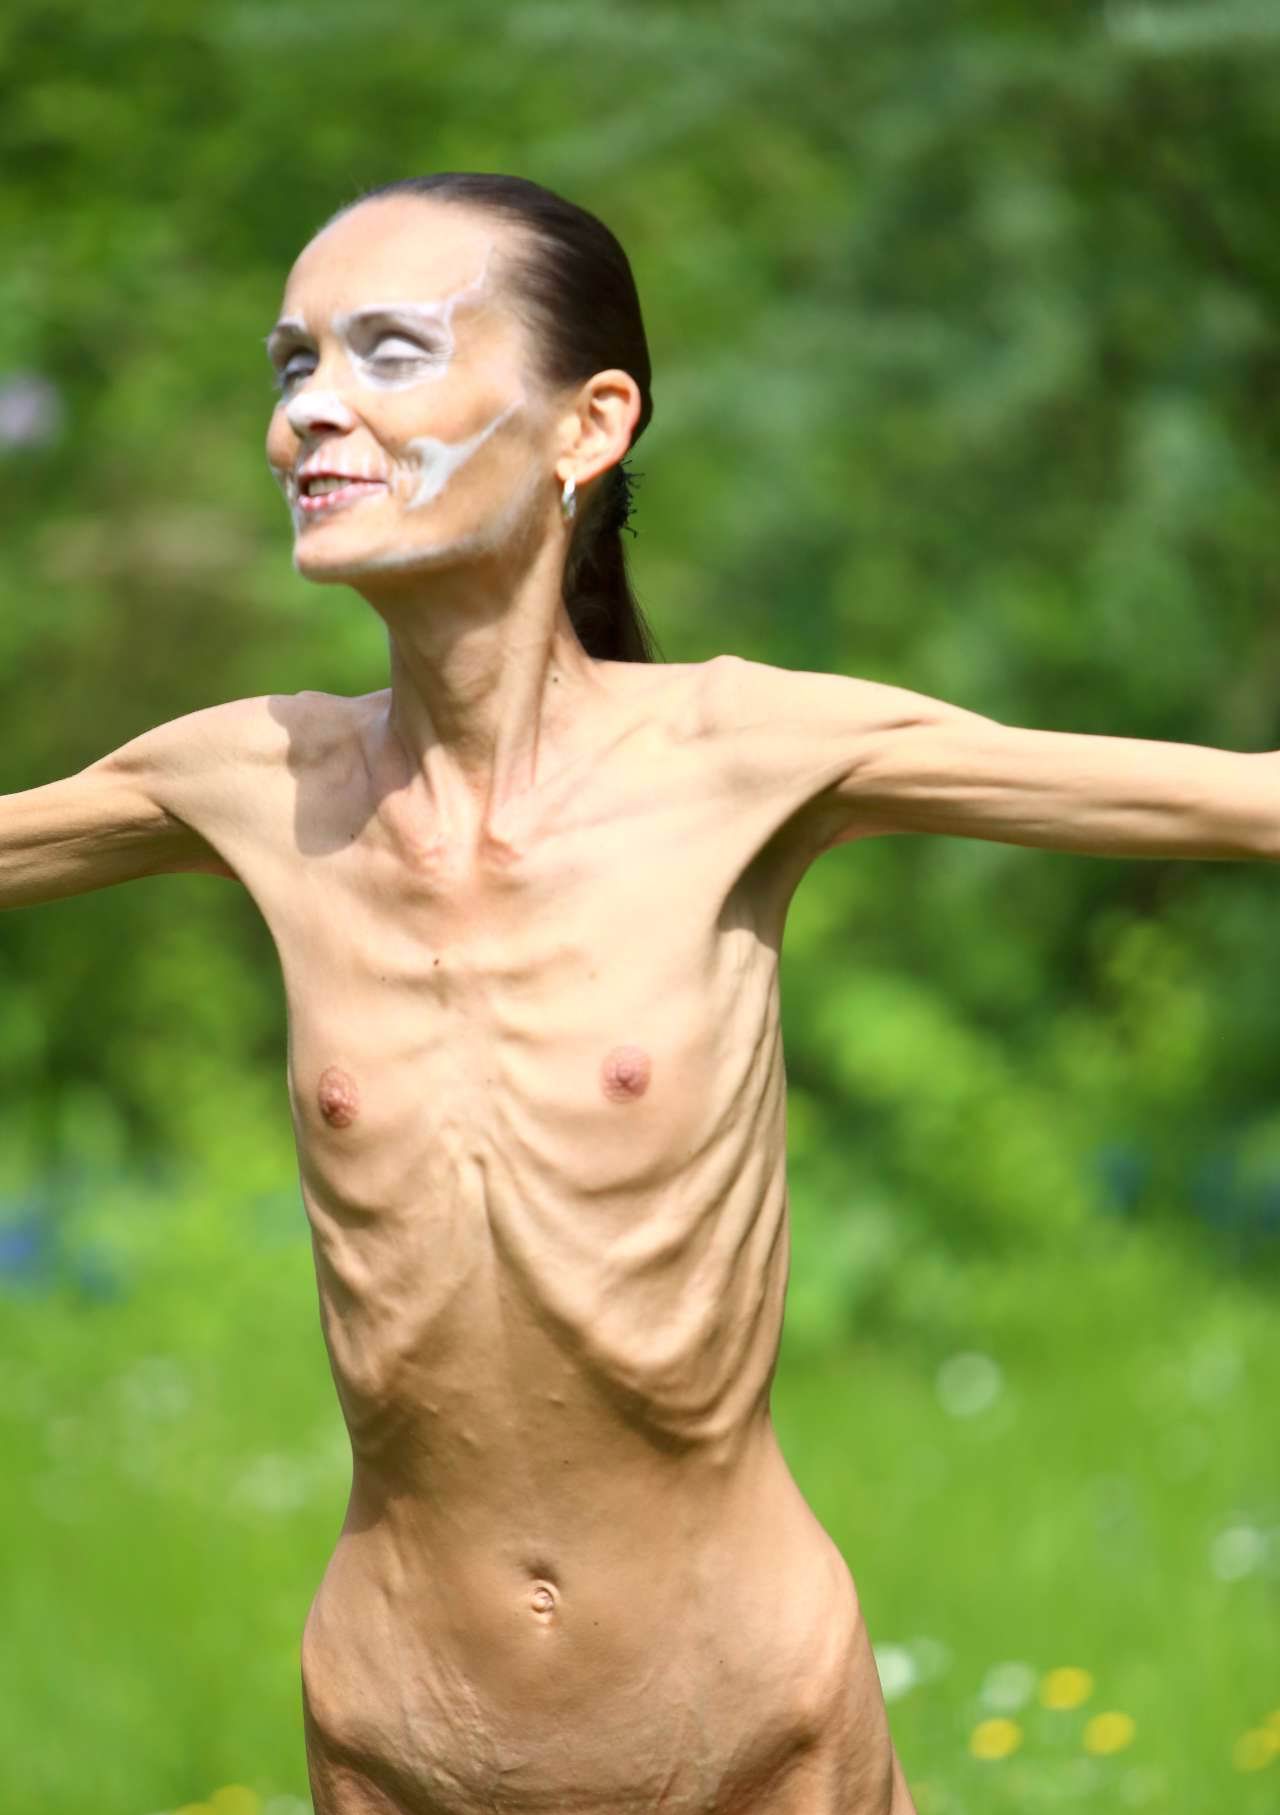 Anorexia nude model.